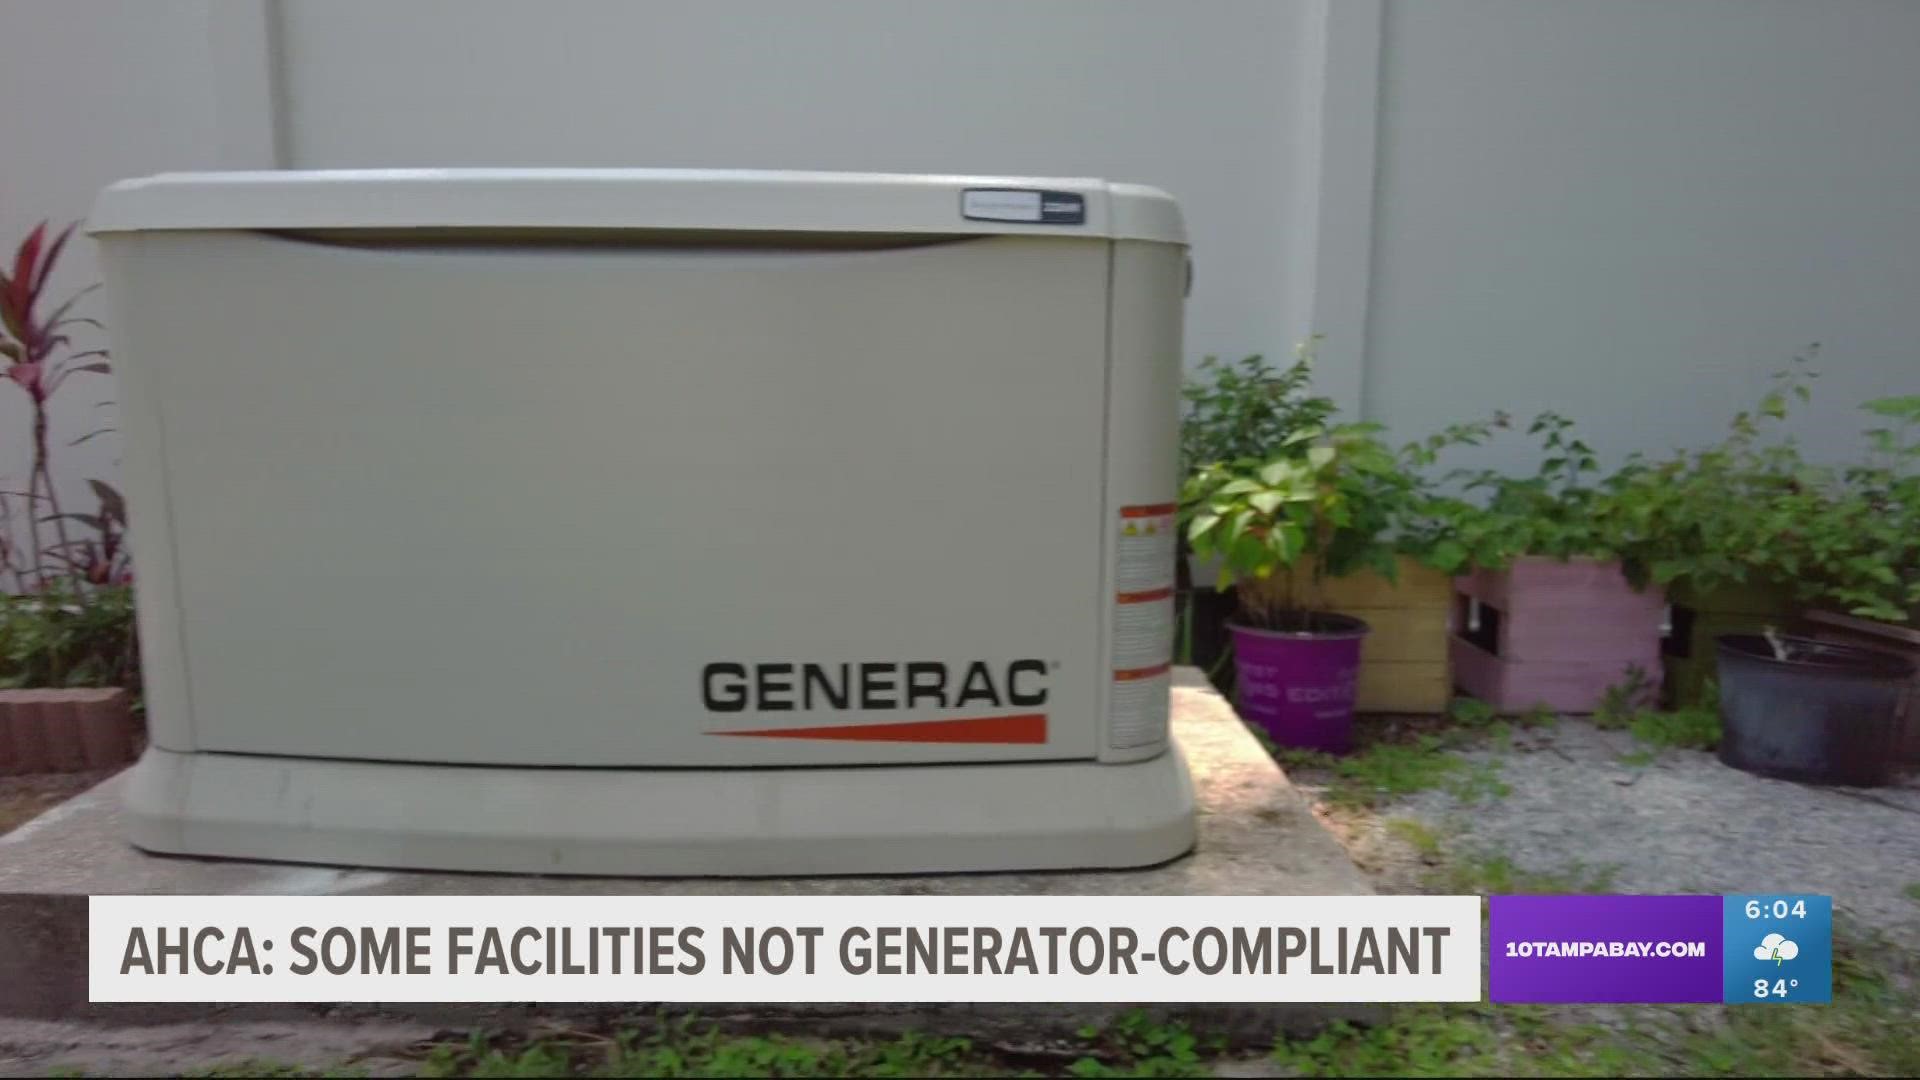 Nursing homes and assisted living facilities are required to have an emergency plan and a source for backup power to maintain air conditioning for 72 hours.